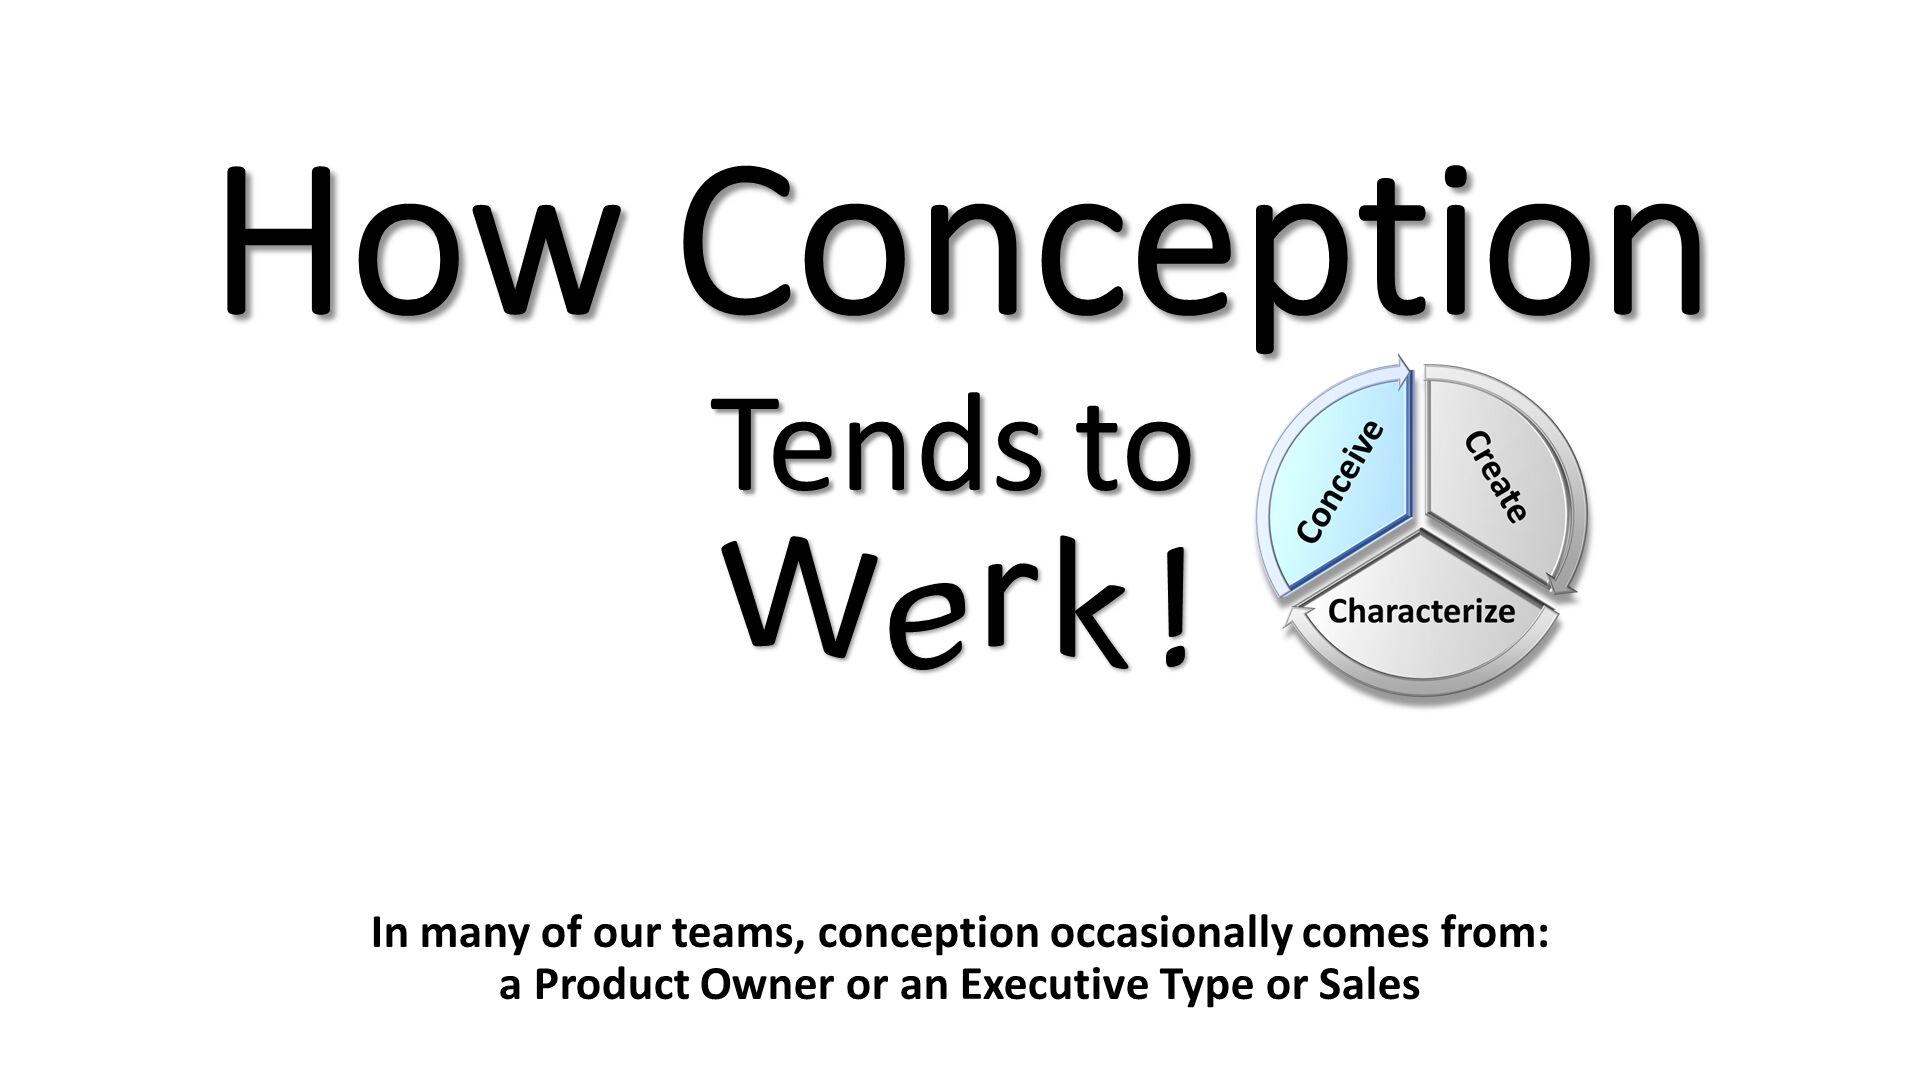 How Conception. In many of our teams, conception occasionally comes from:a Product Owner or an Executive Type or Sales . Werk!. Tends to. 